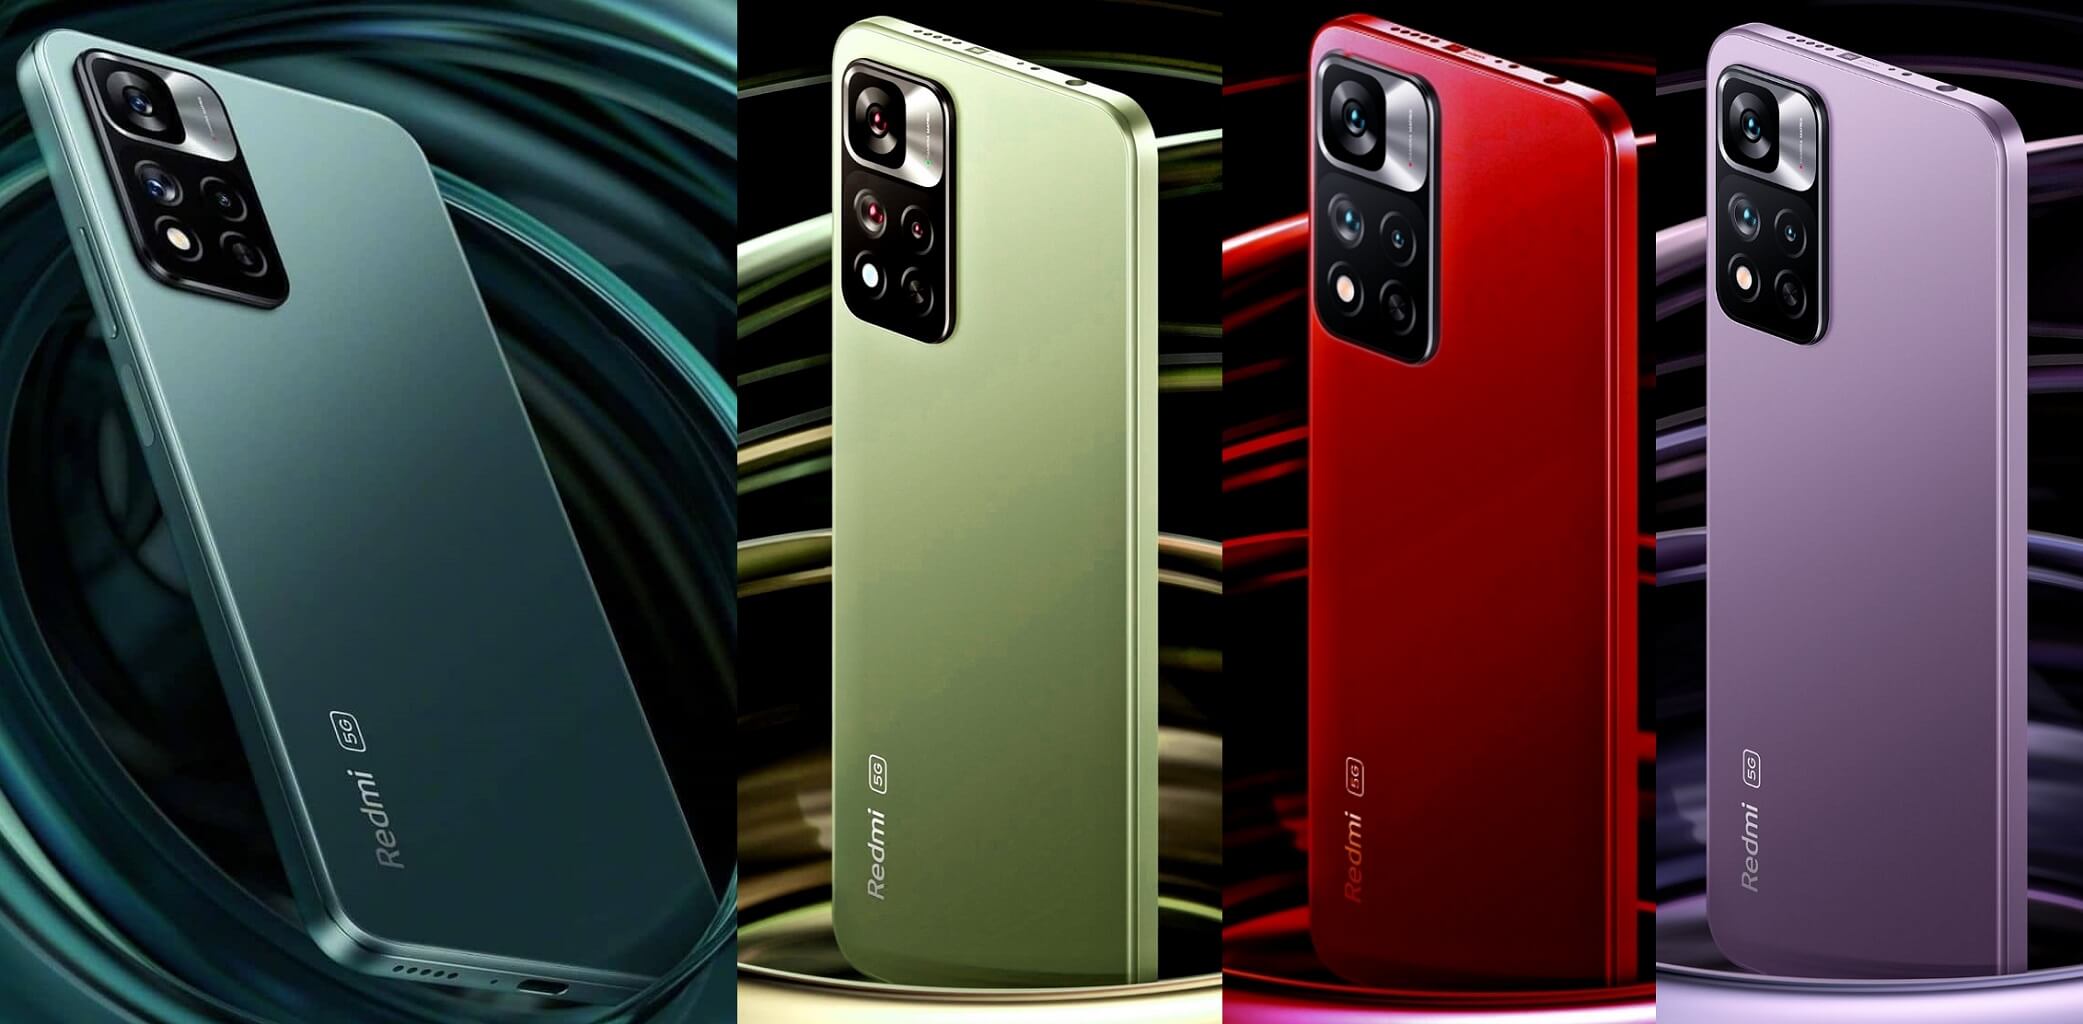 Redmi Note 11 and Note 11 Pro colors